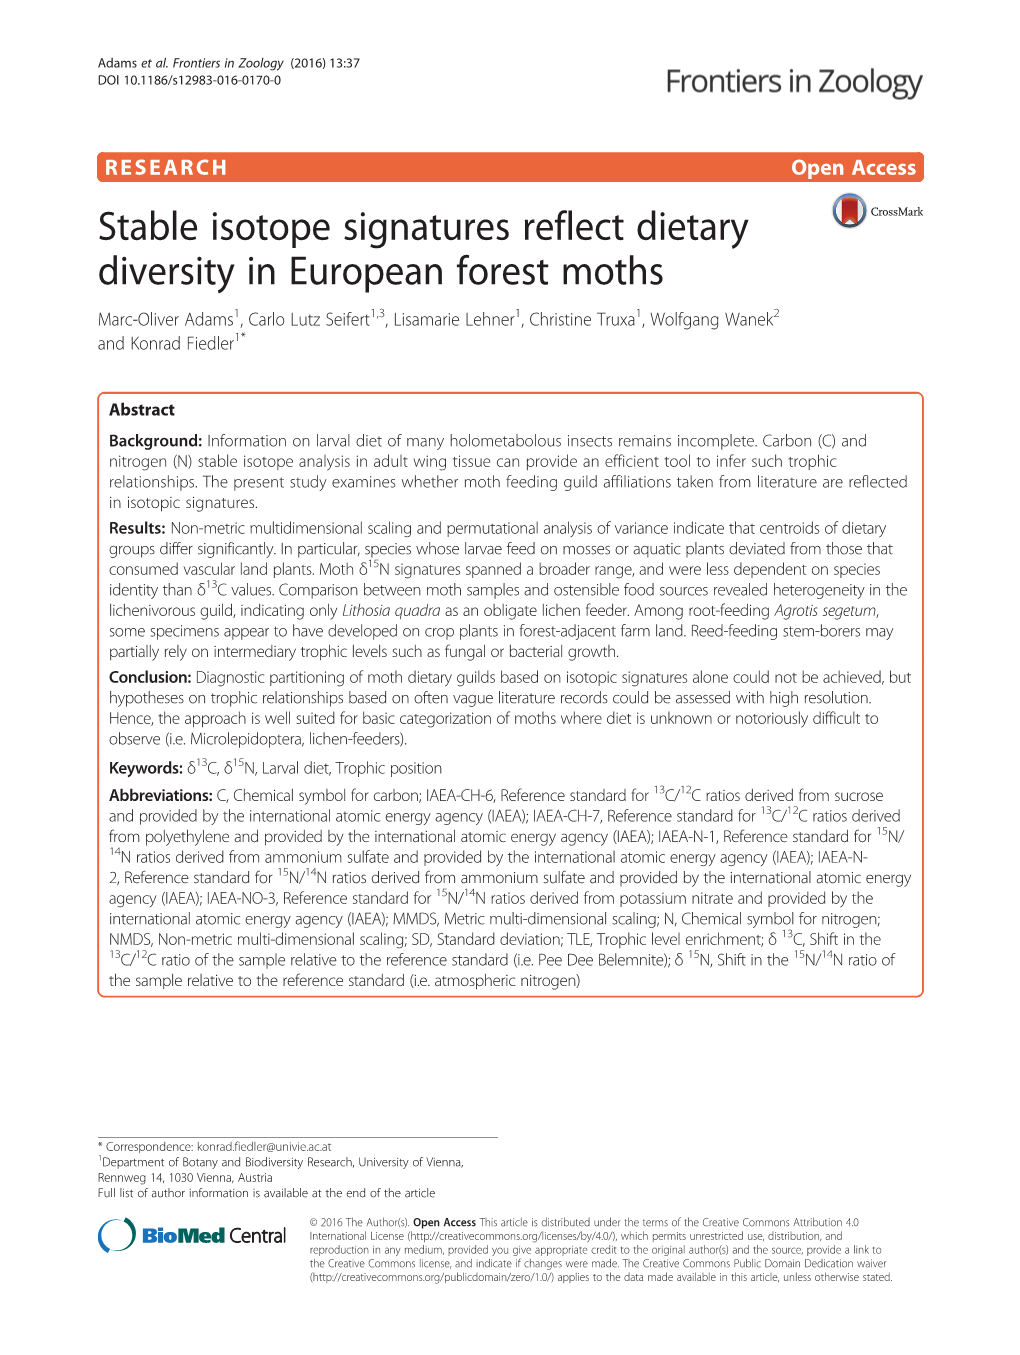 Stable Isotope Signatures Reflect Dietary Diversity in European Forest